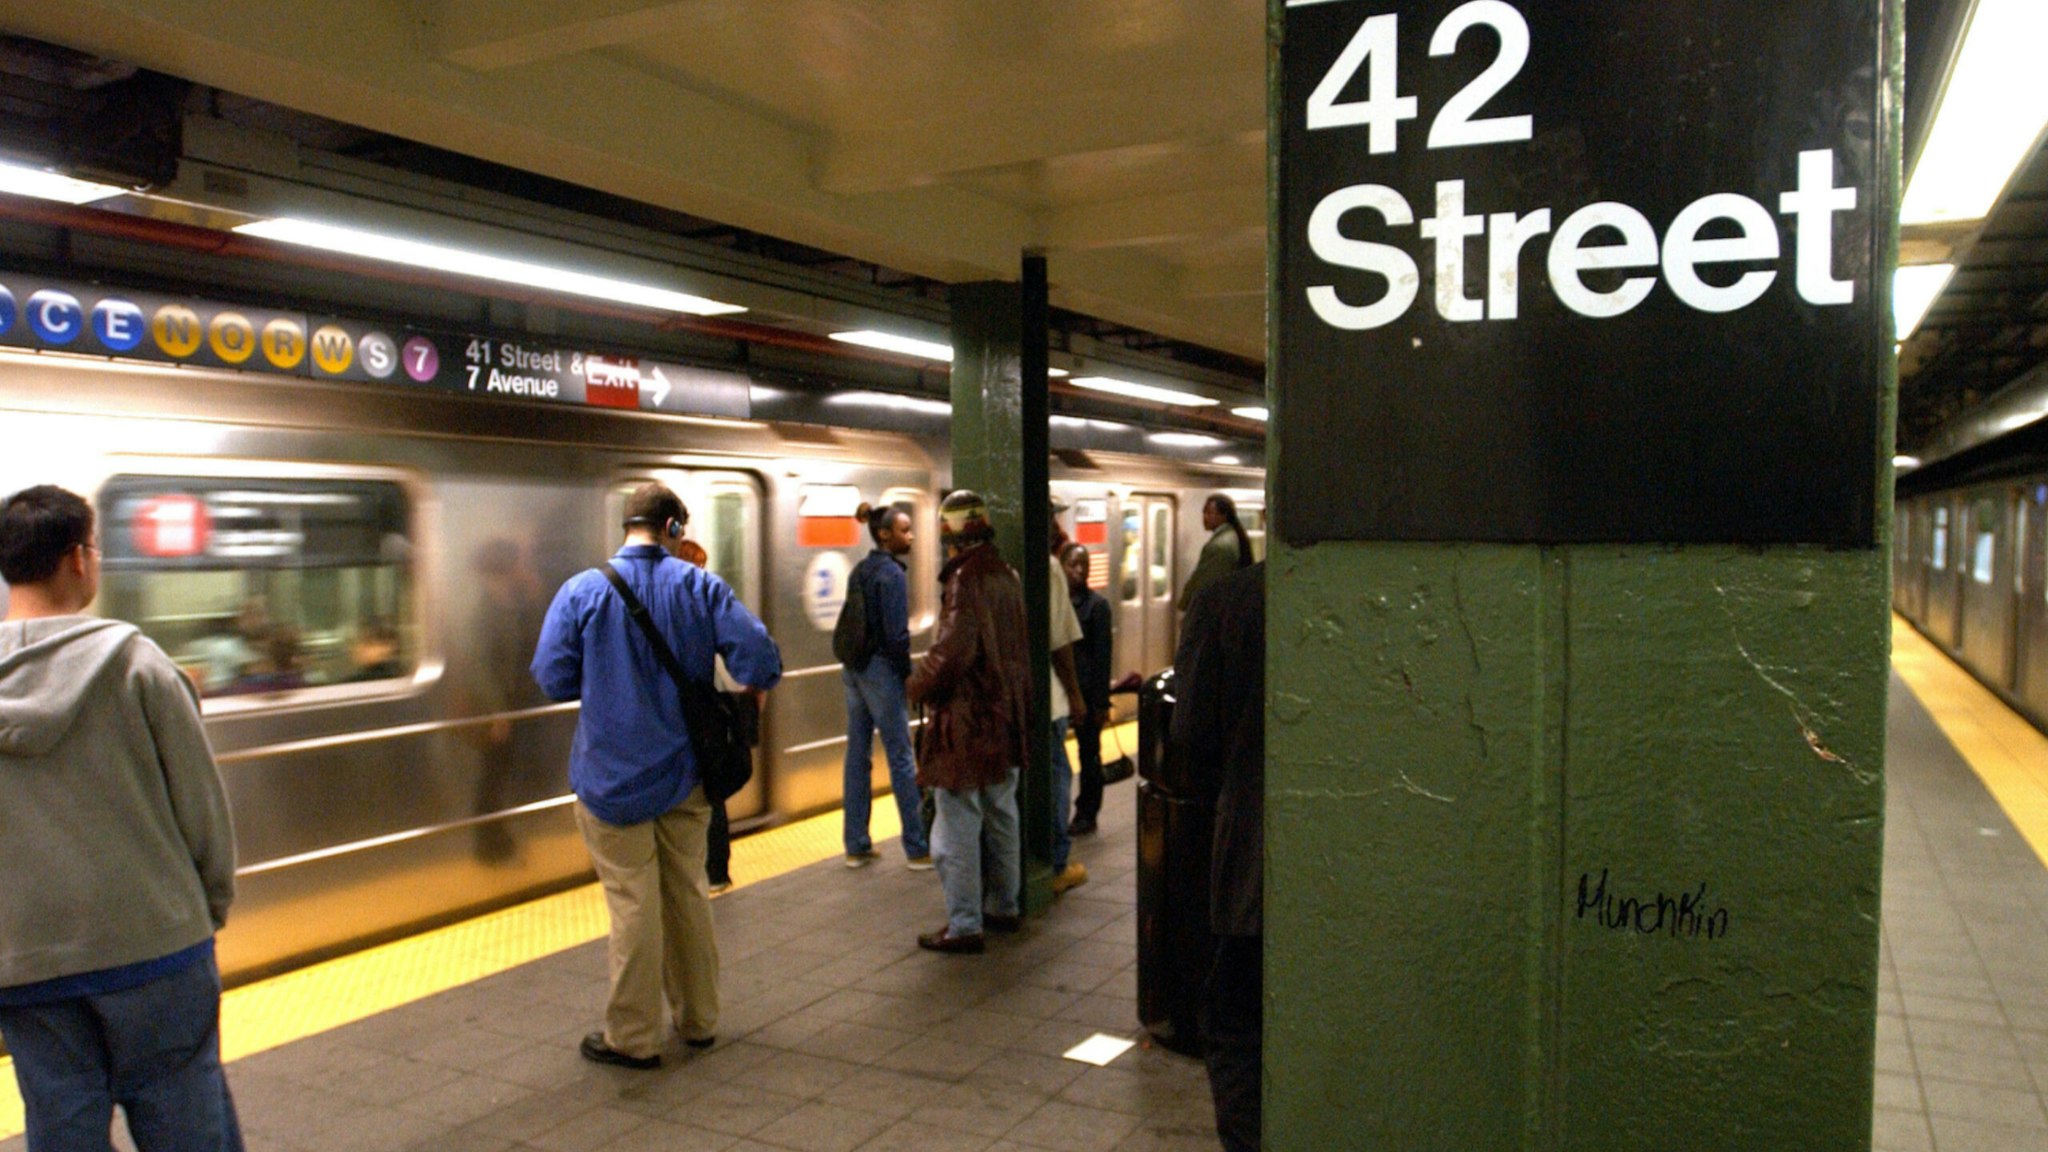 People wait for a train in a subway station June 18, 2003 in New York City.